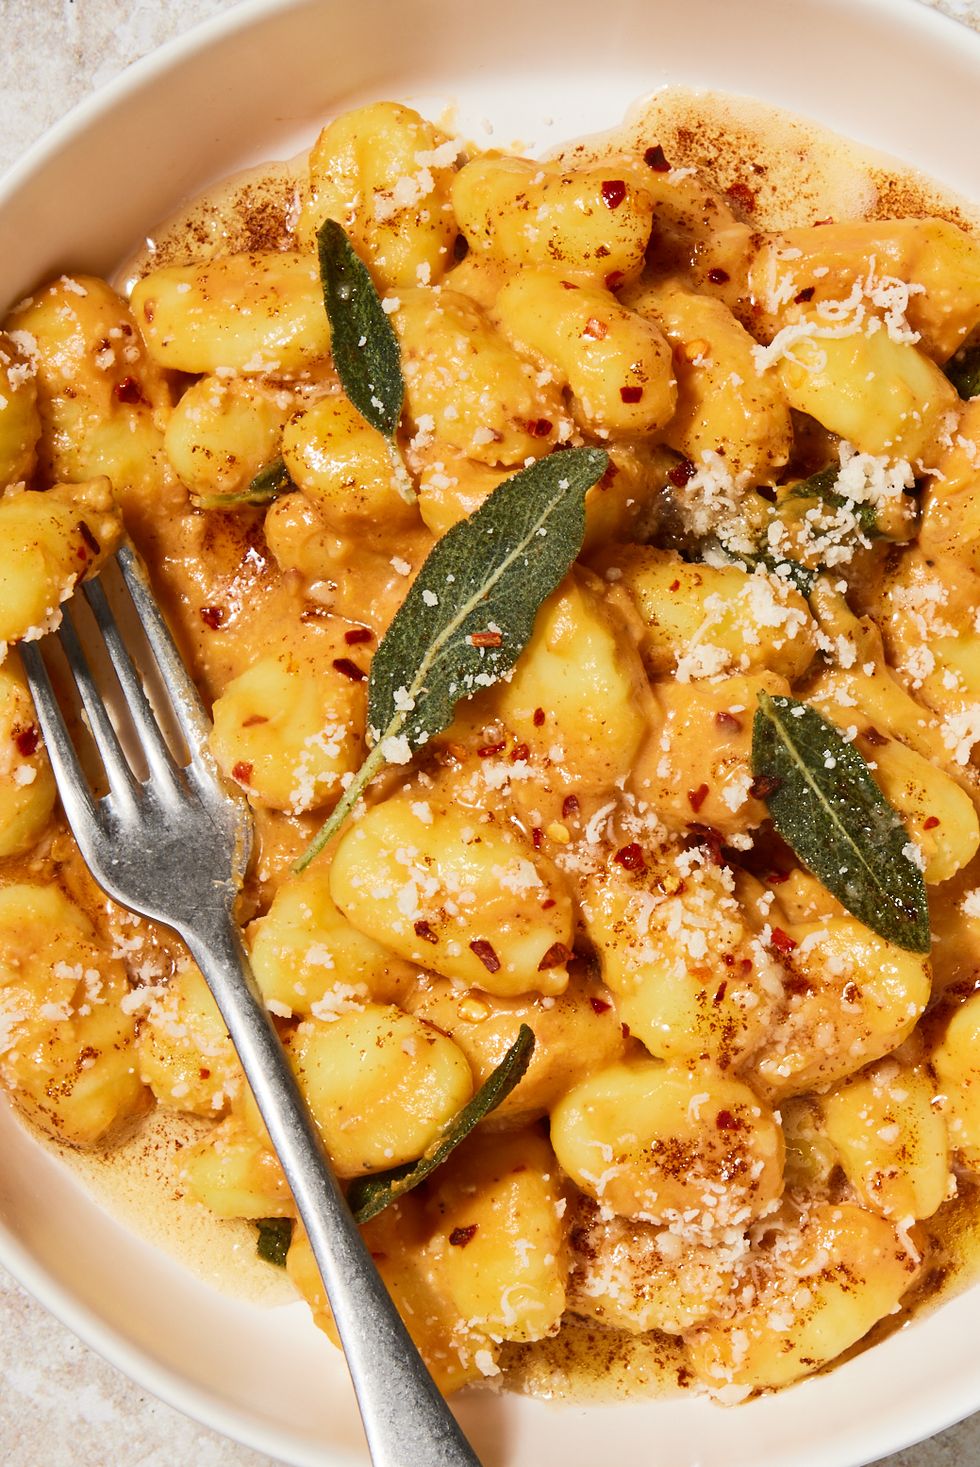 gnocchi tossed in a sweet potato maple brown butter sauce